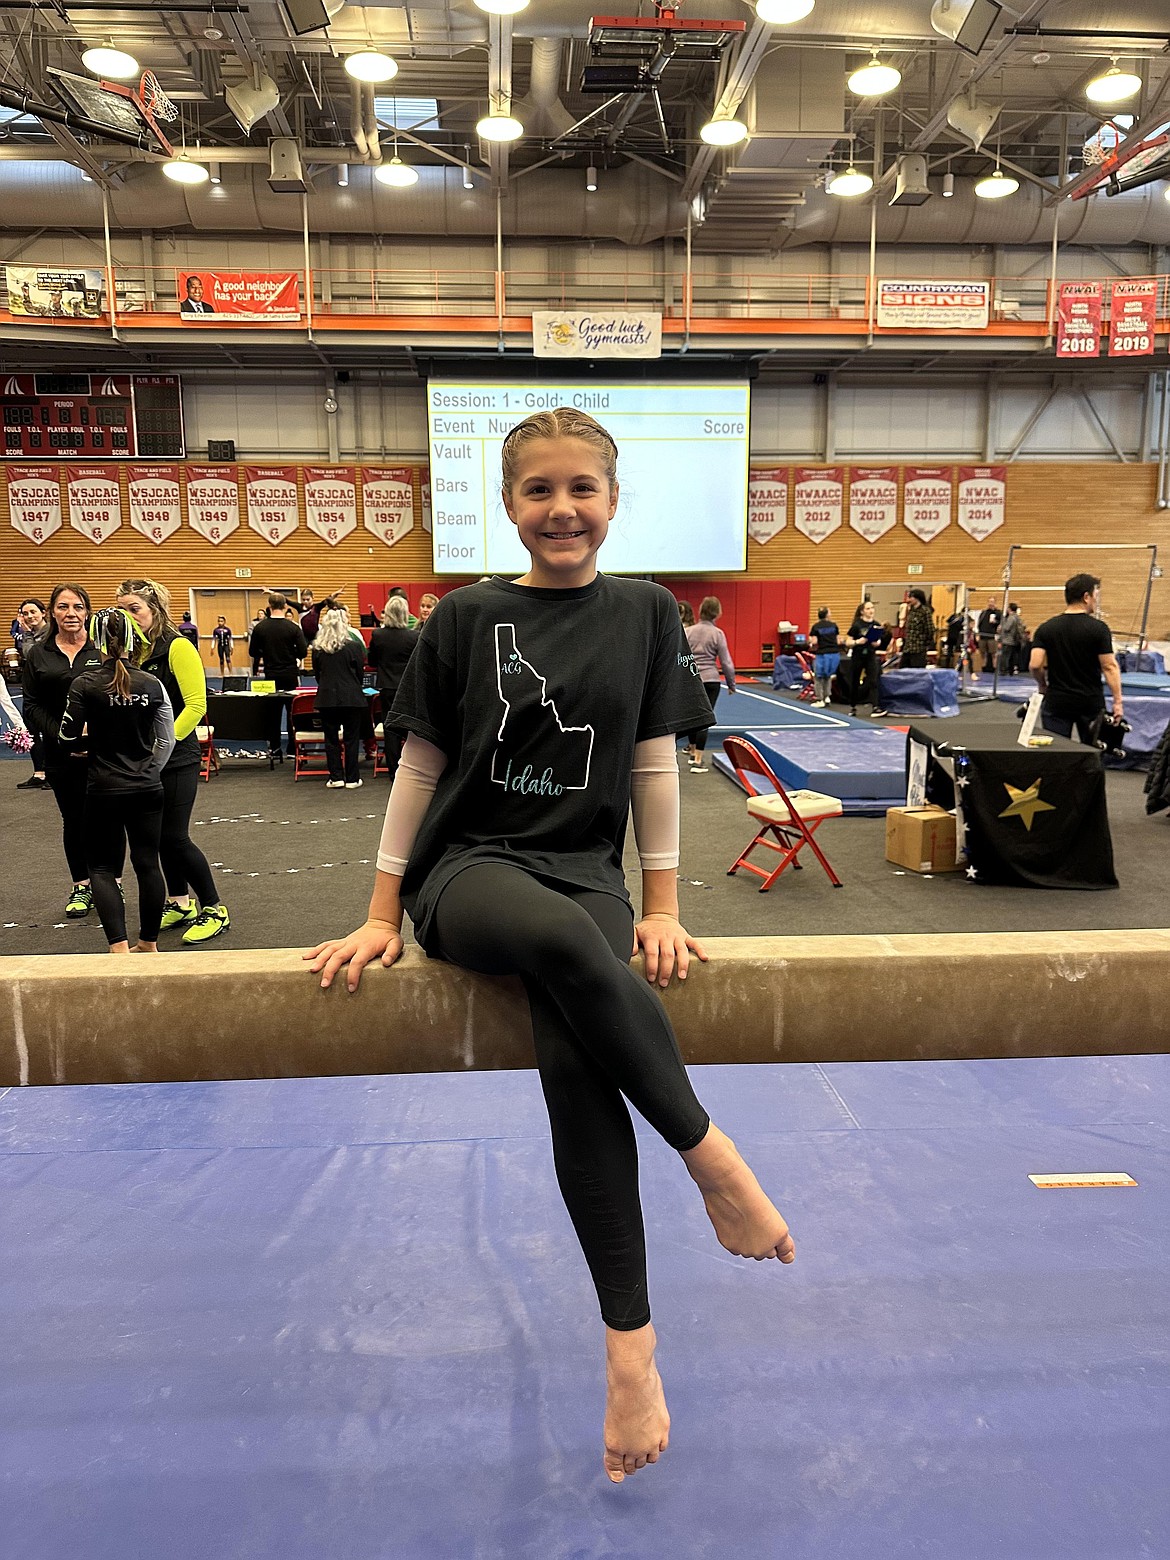 Courtesy photo
Avant Coeur Gymnastics Child division Xcel Gold Issoria Austin competed in Everett, Wash., at the Region 2 Xcel Championships.